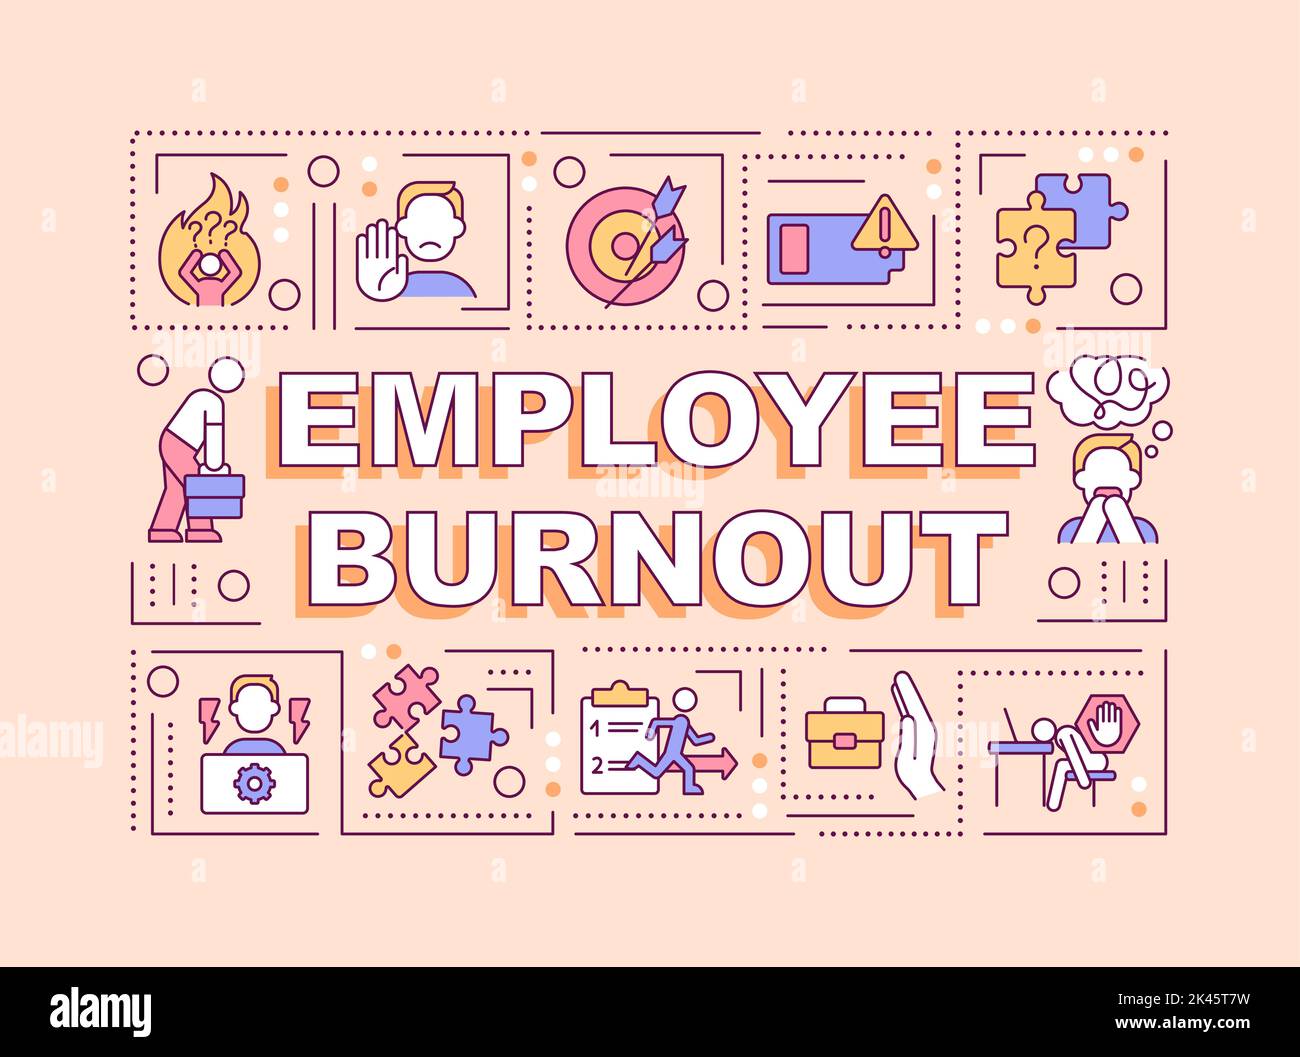 Employee burnout word concepts peachy banner Stock Vector